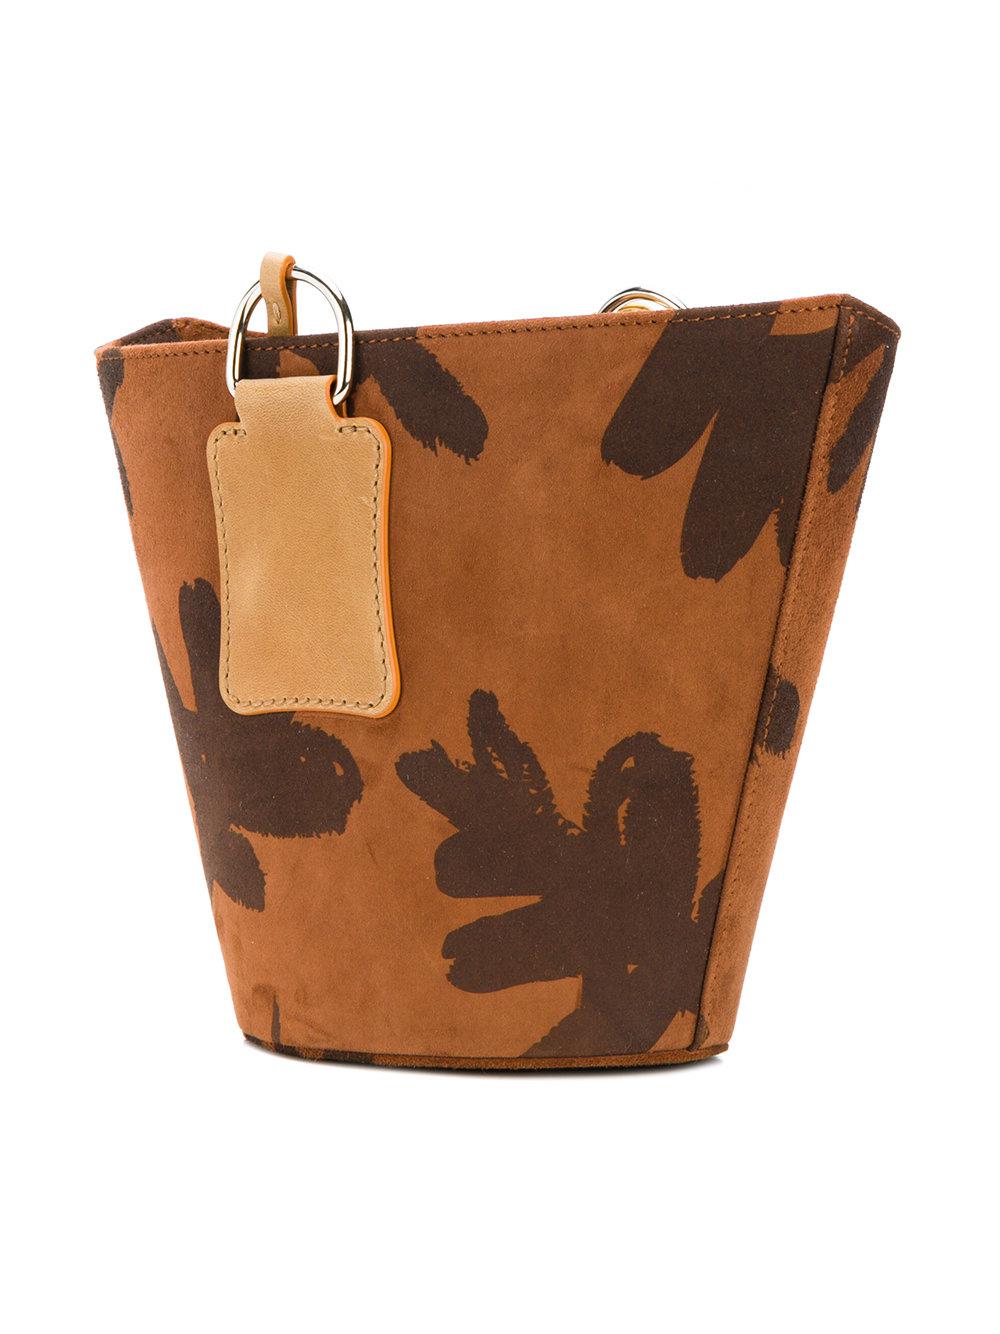 Jacquemus Leather Printed Bucket Bag in Brown - Lyst